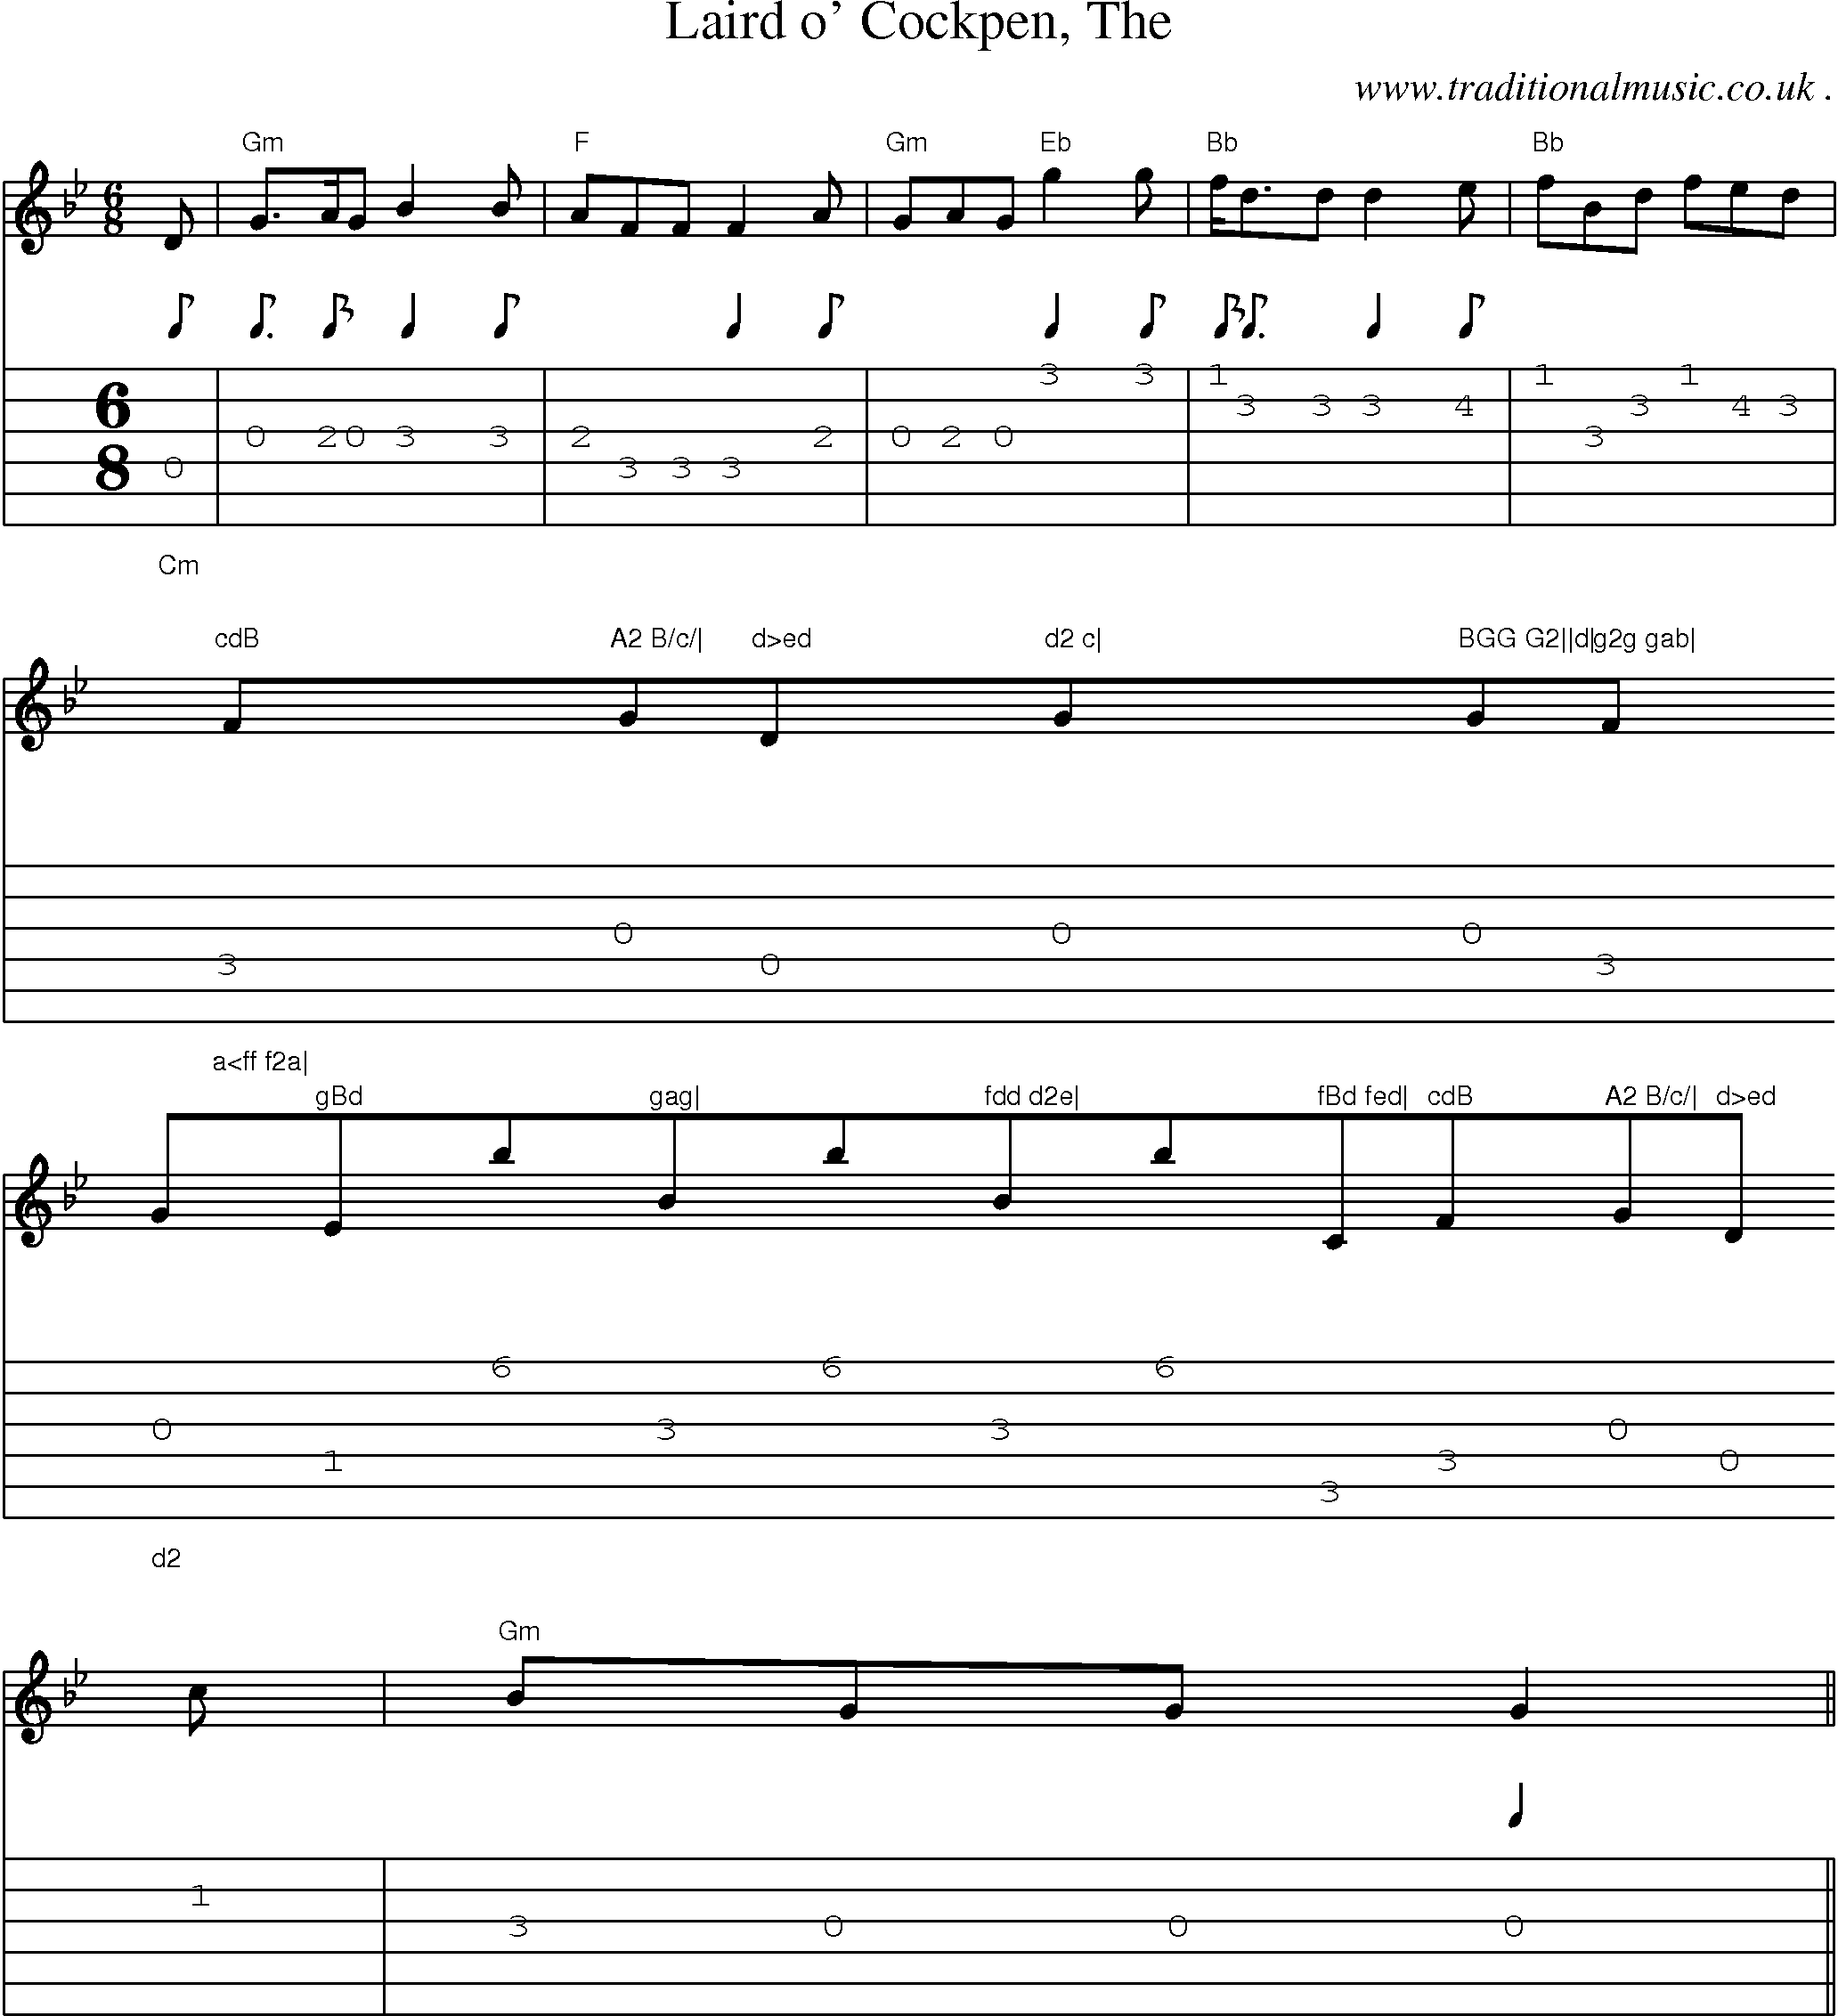 Sheet-music  score, Chords and Guitar Tabs for Laird O Cockpen The